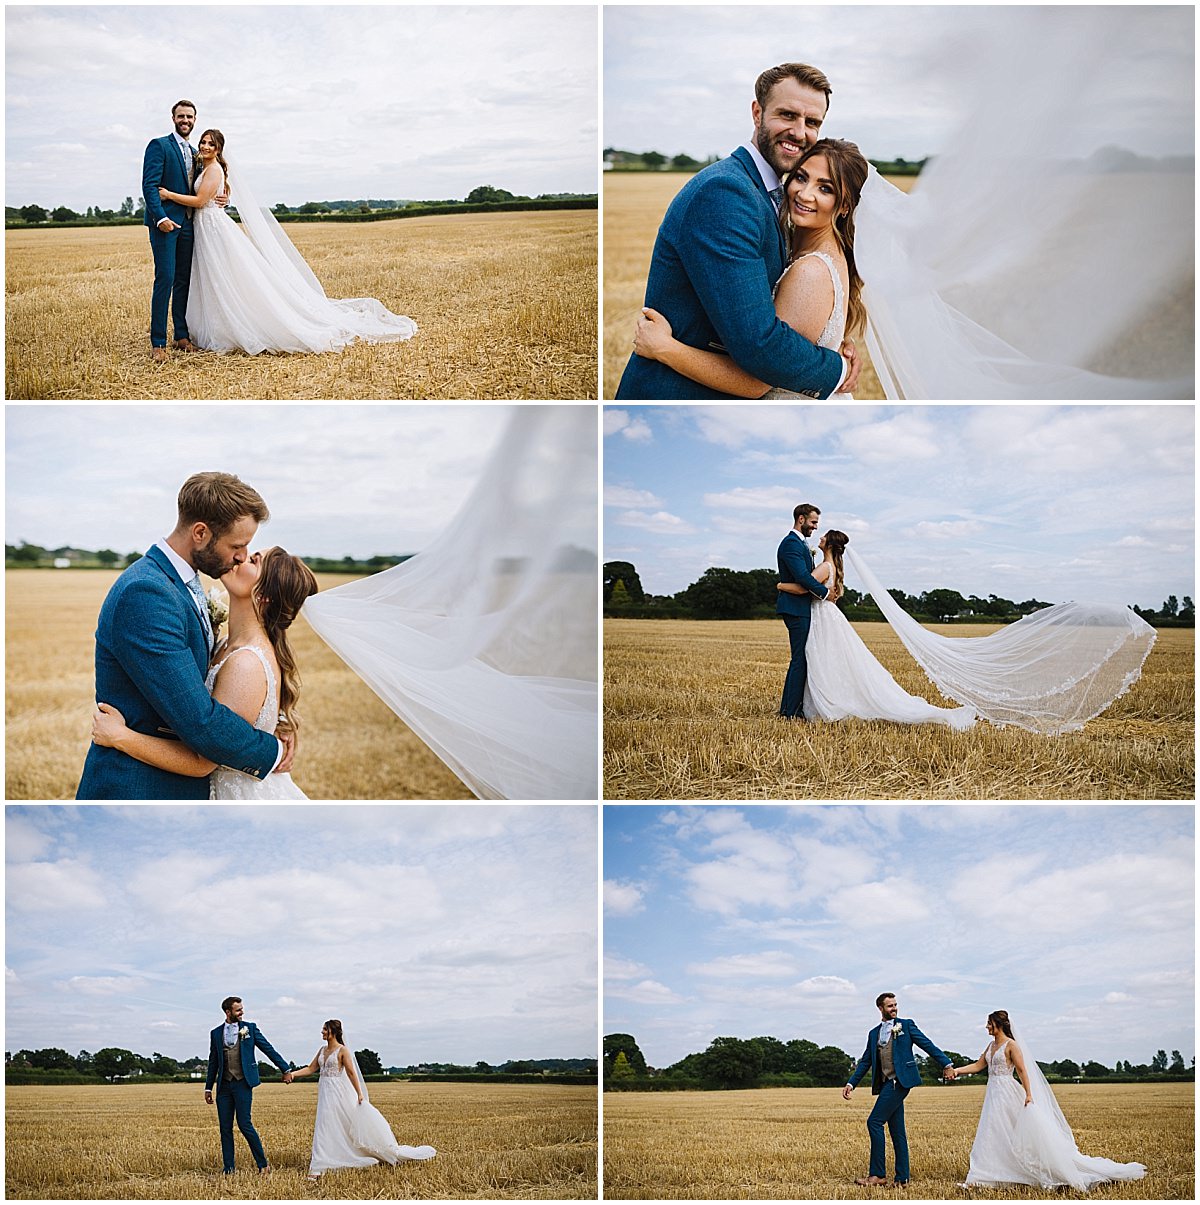 Beautiful couples portraits in the fields at stock farm